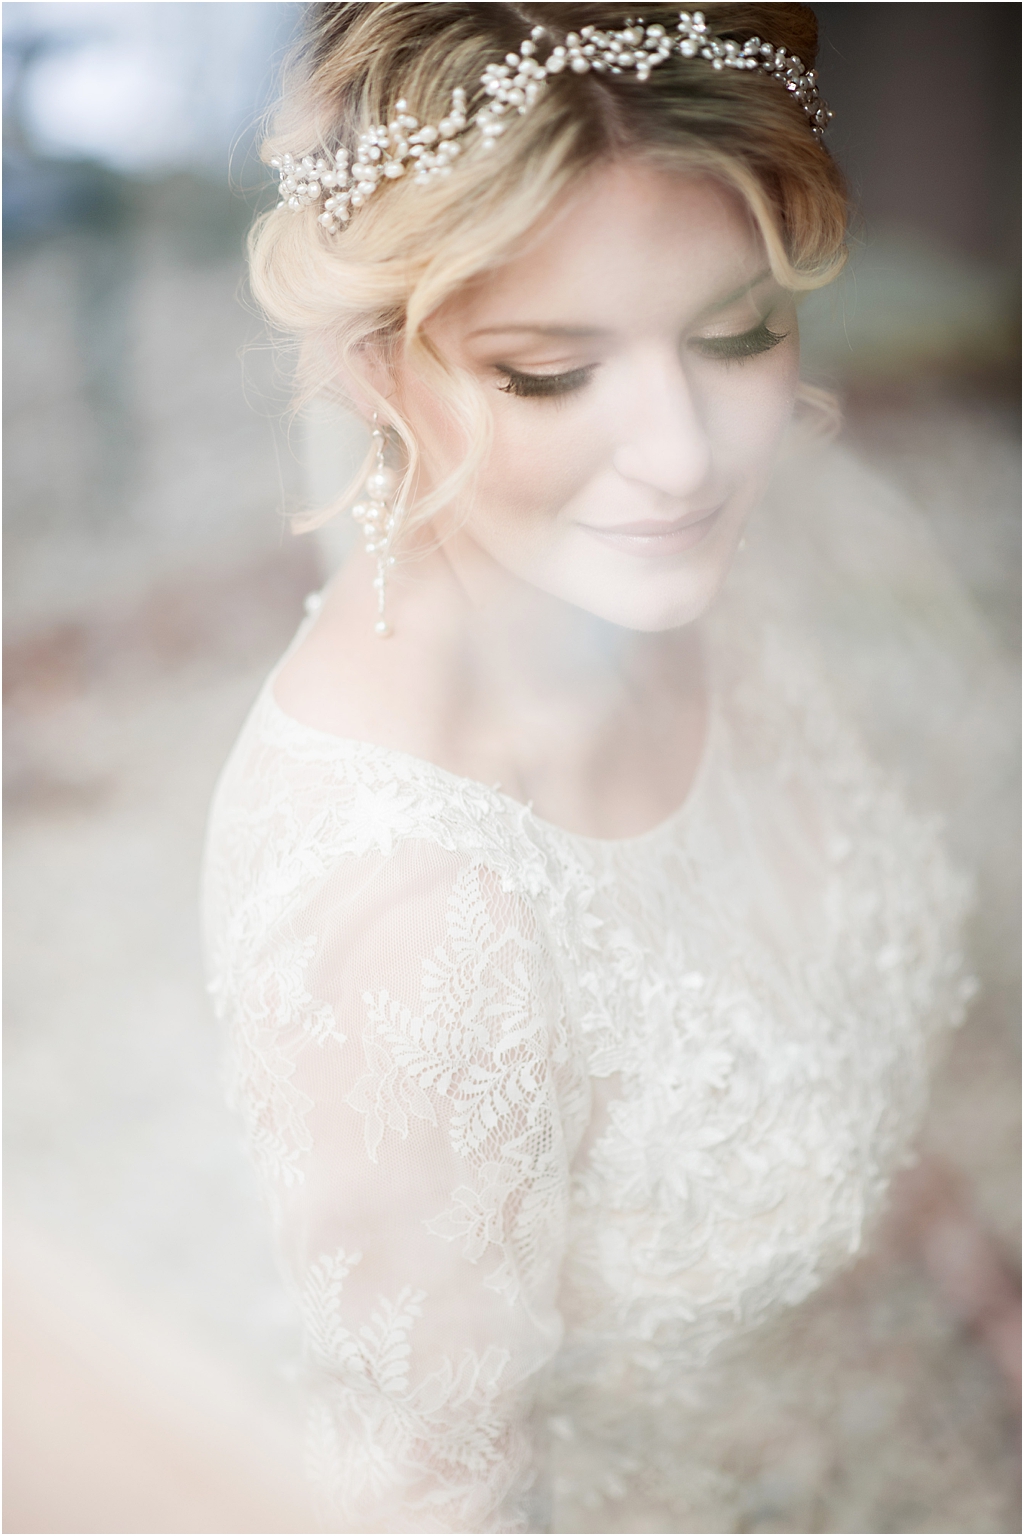 beautiful photo of bridal portrait in the bhldn amelie gown by ashley fisher photography